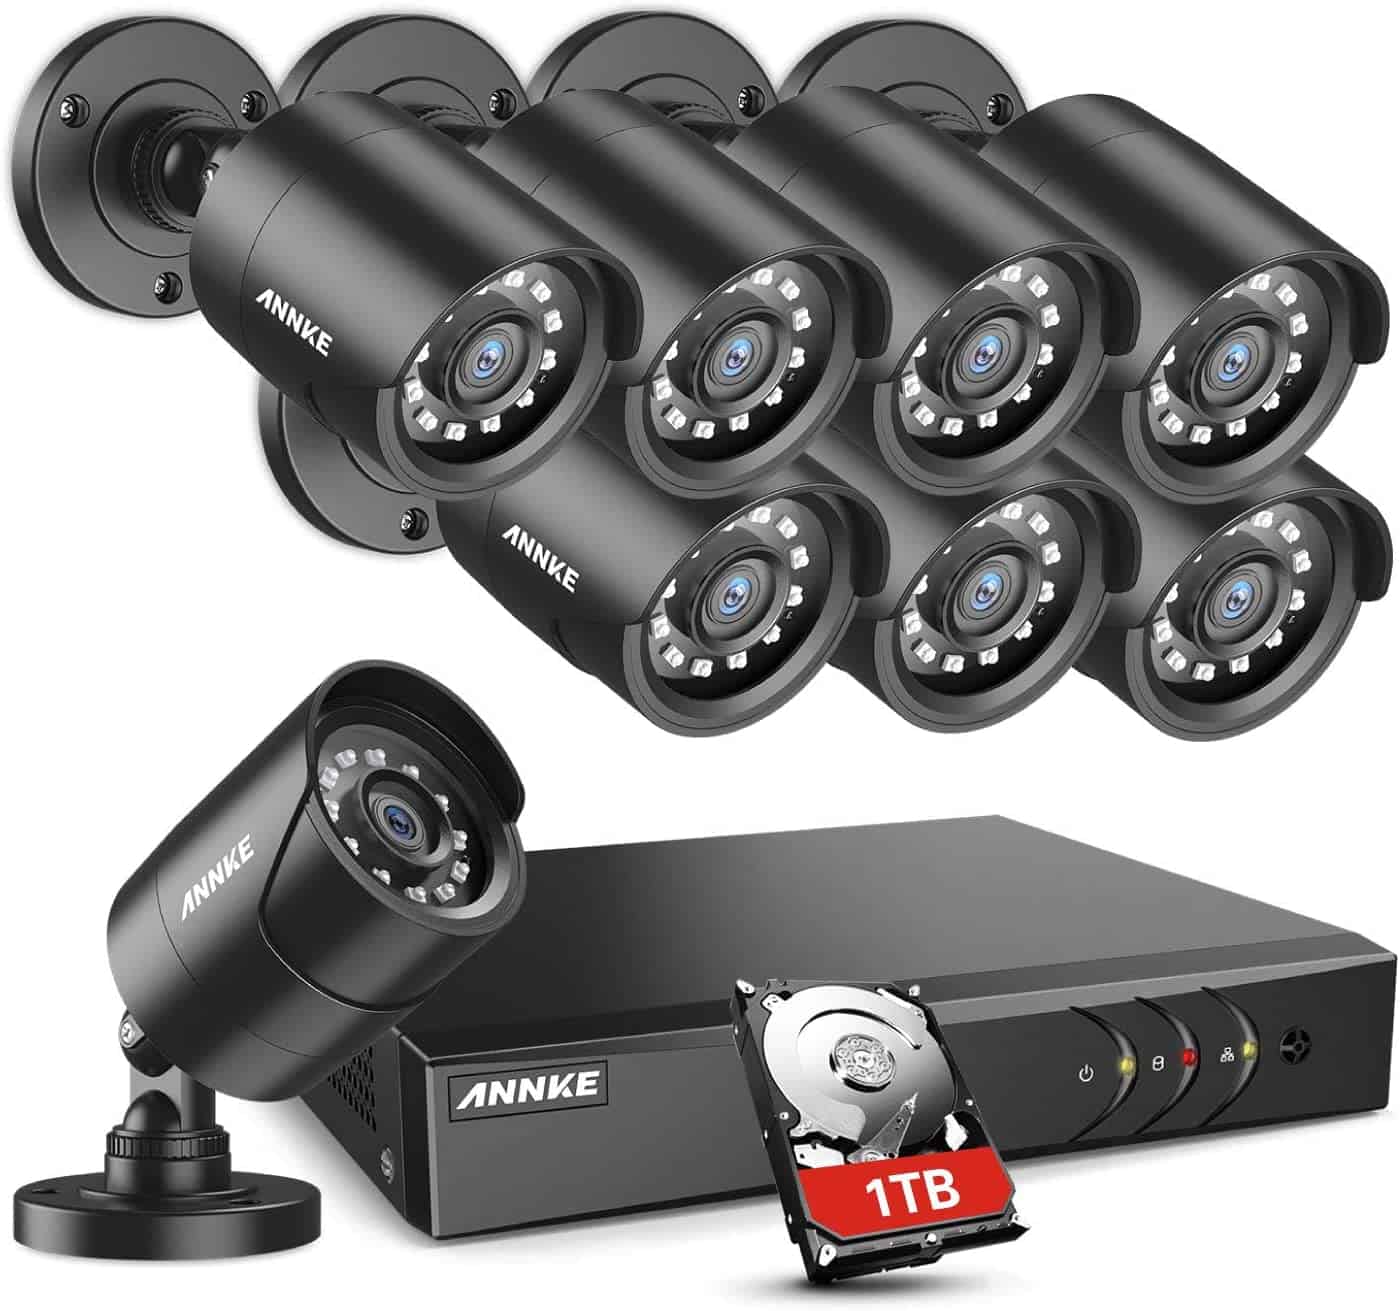 ANNKE Home Security Camera System Review